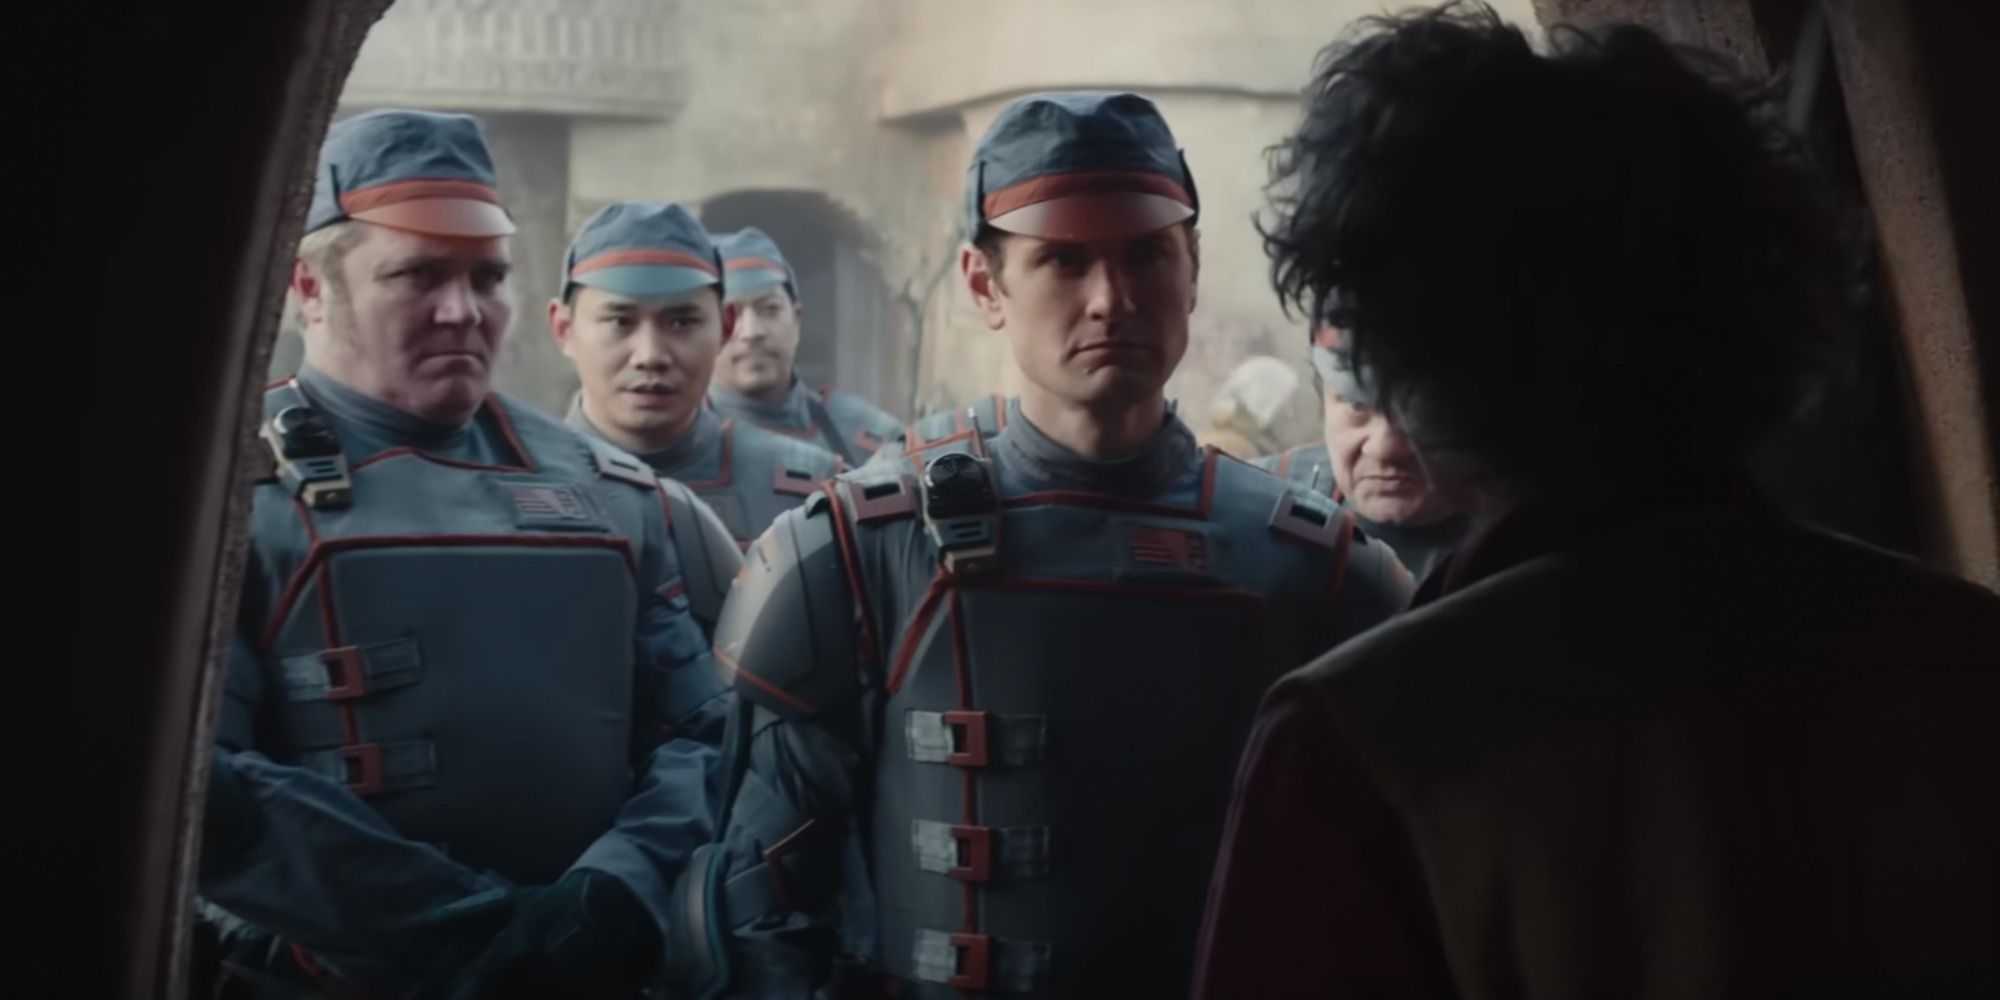 Blue guards appear in Andor trailer.